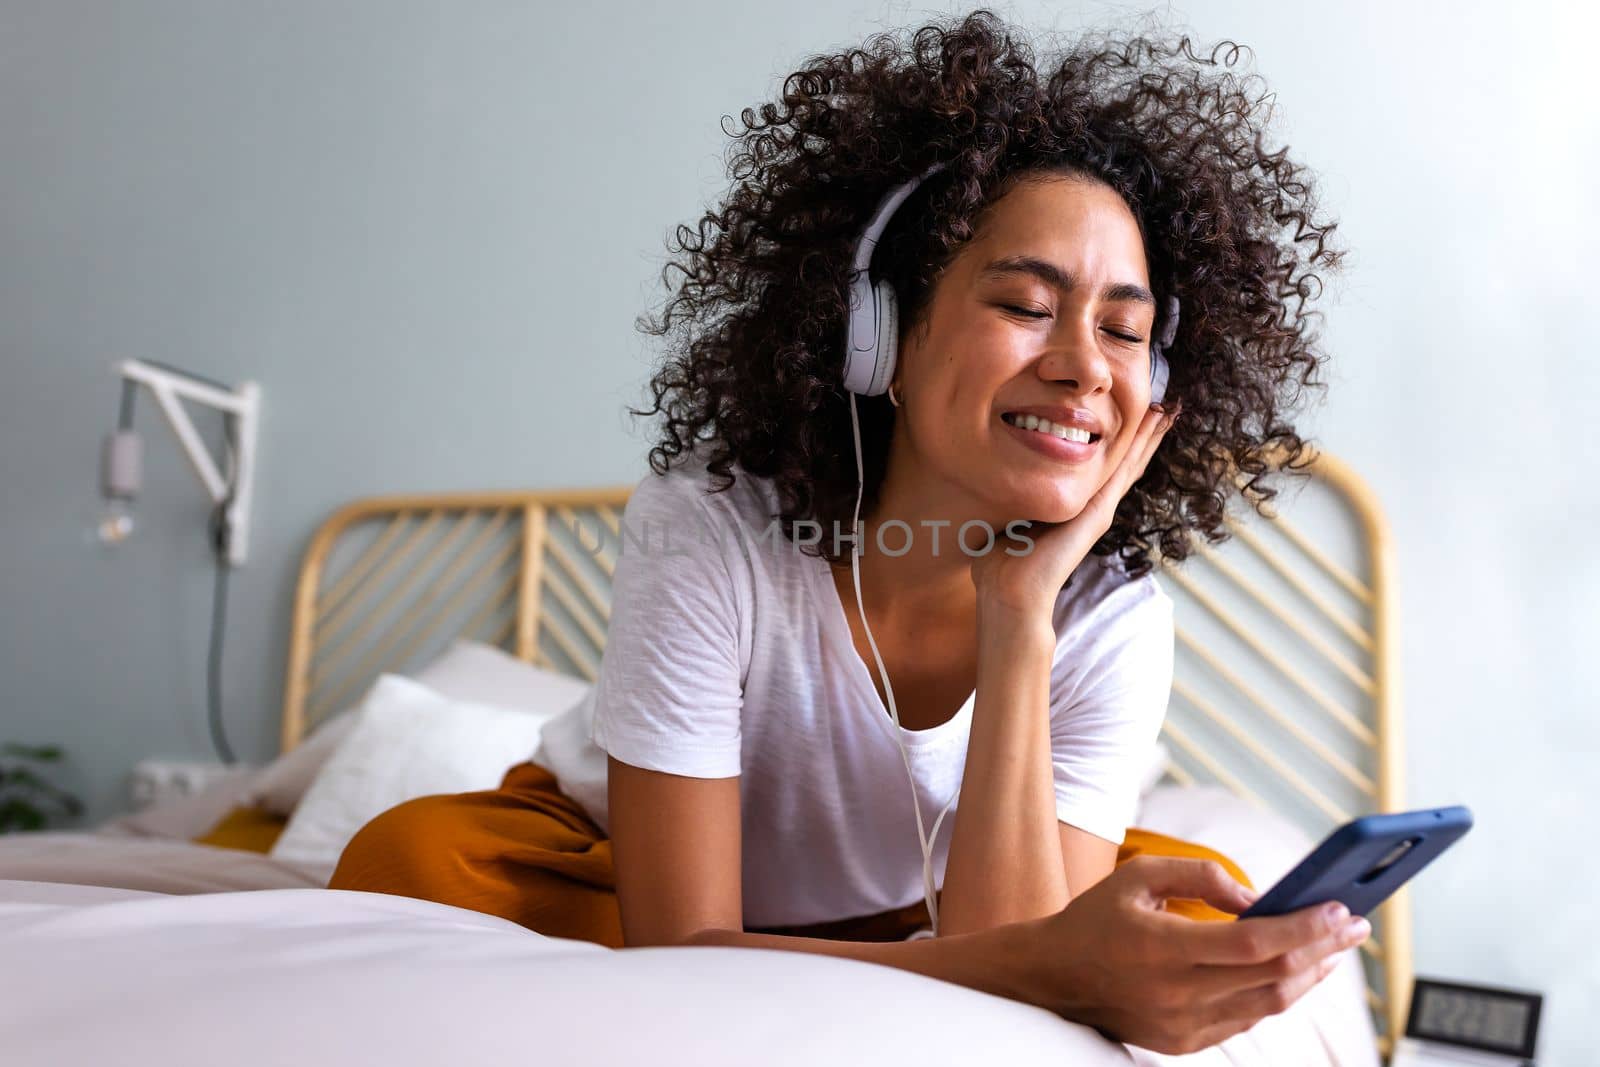 Young multiracial woman enjoying music using headphones and mobile phone relaxing on bed at home cozy bedroom. Lifestyle concept.